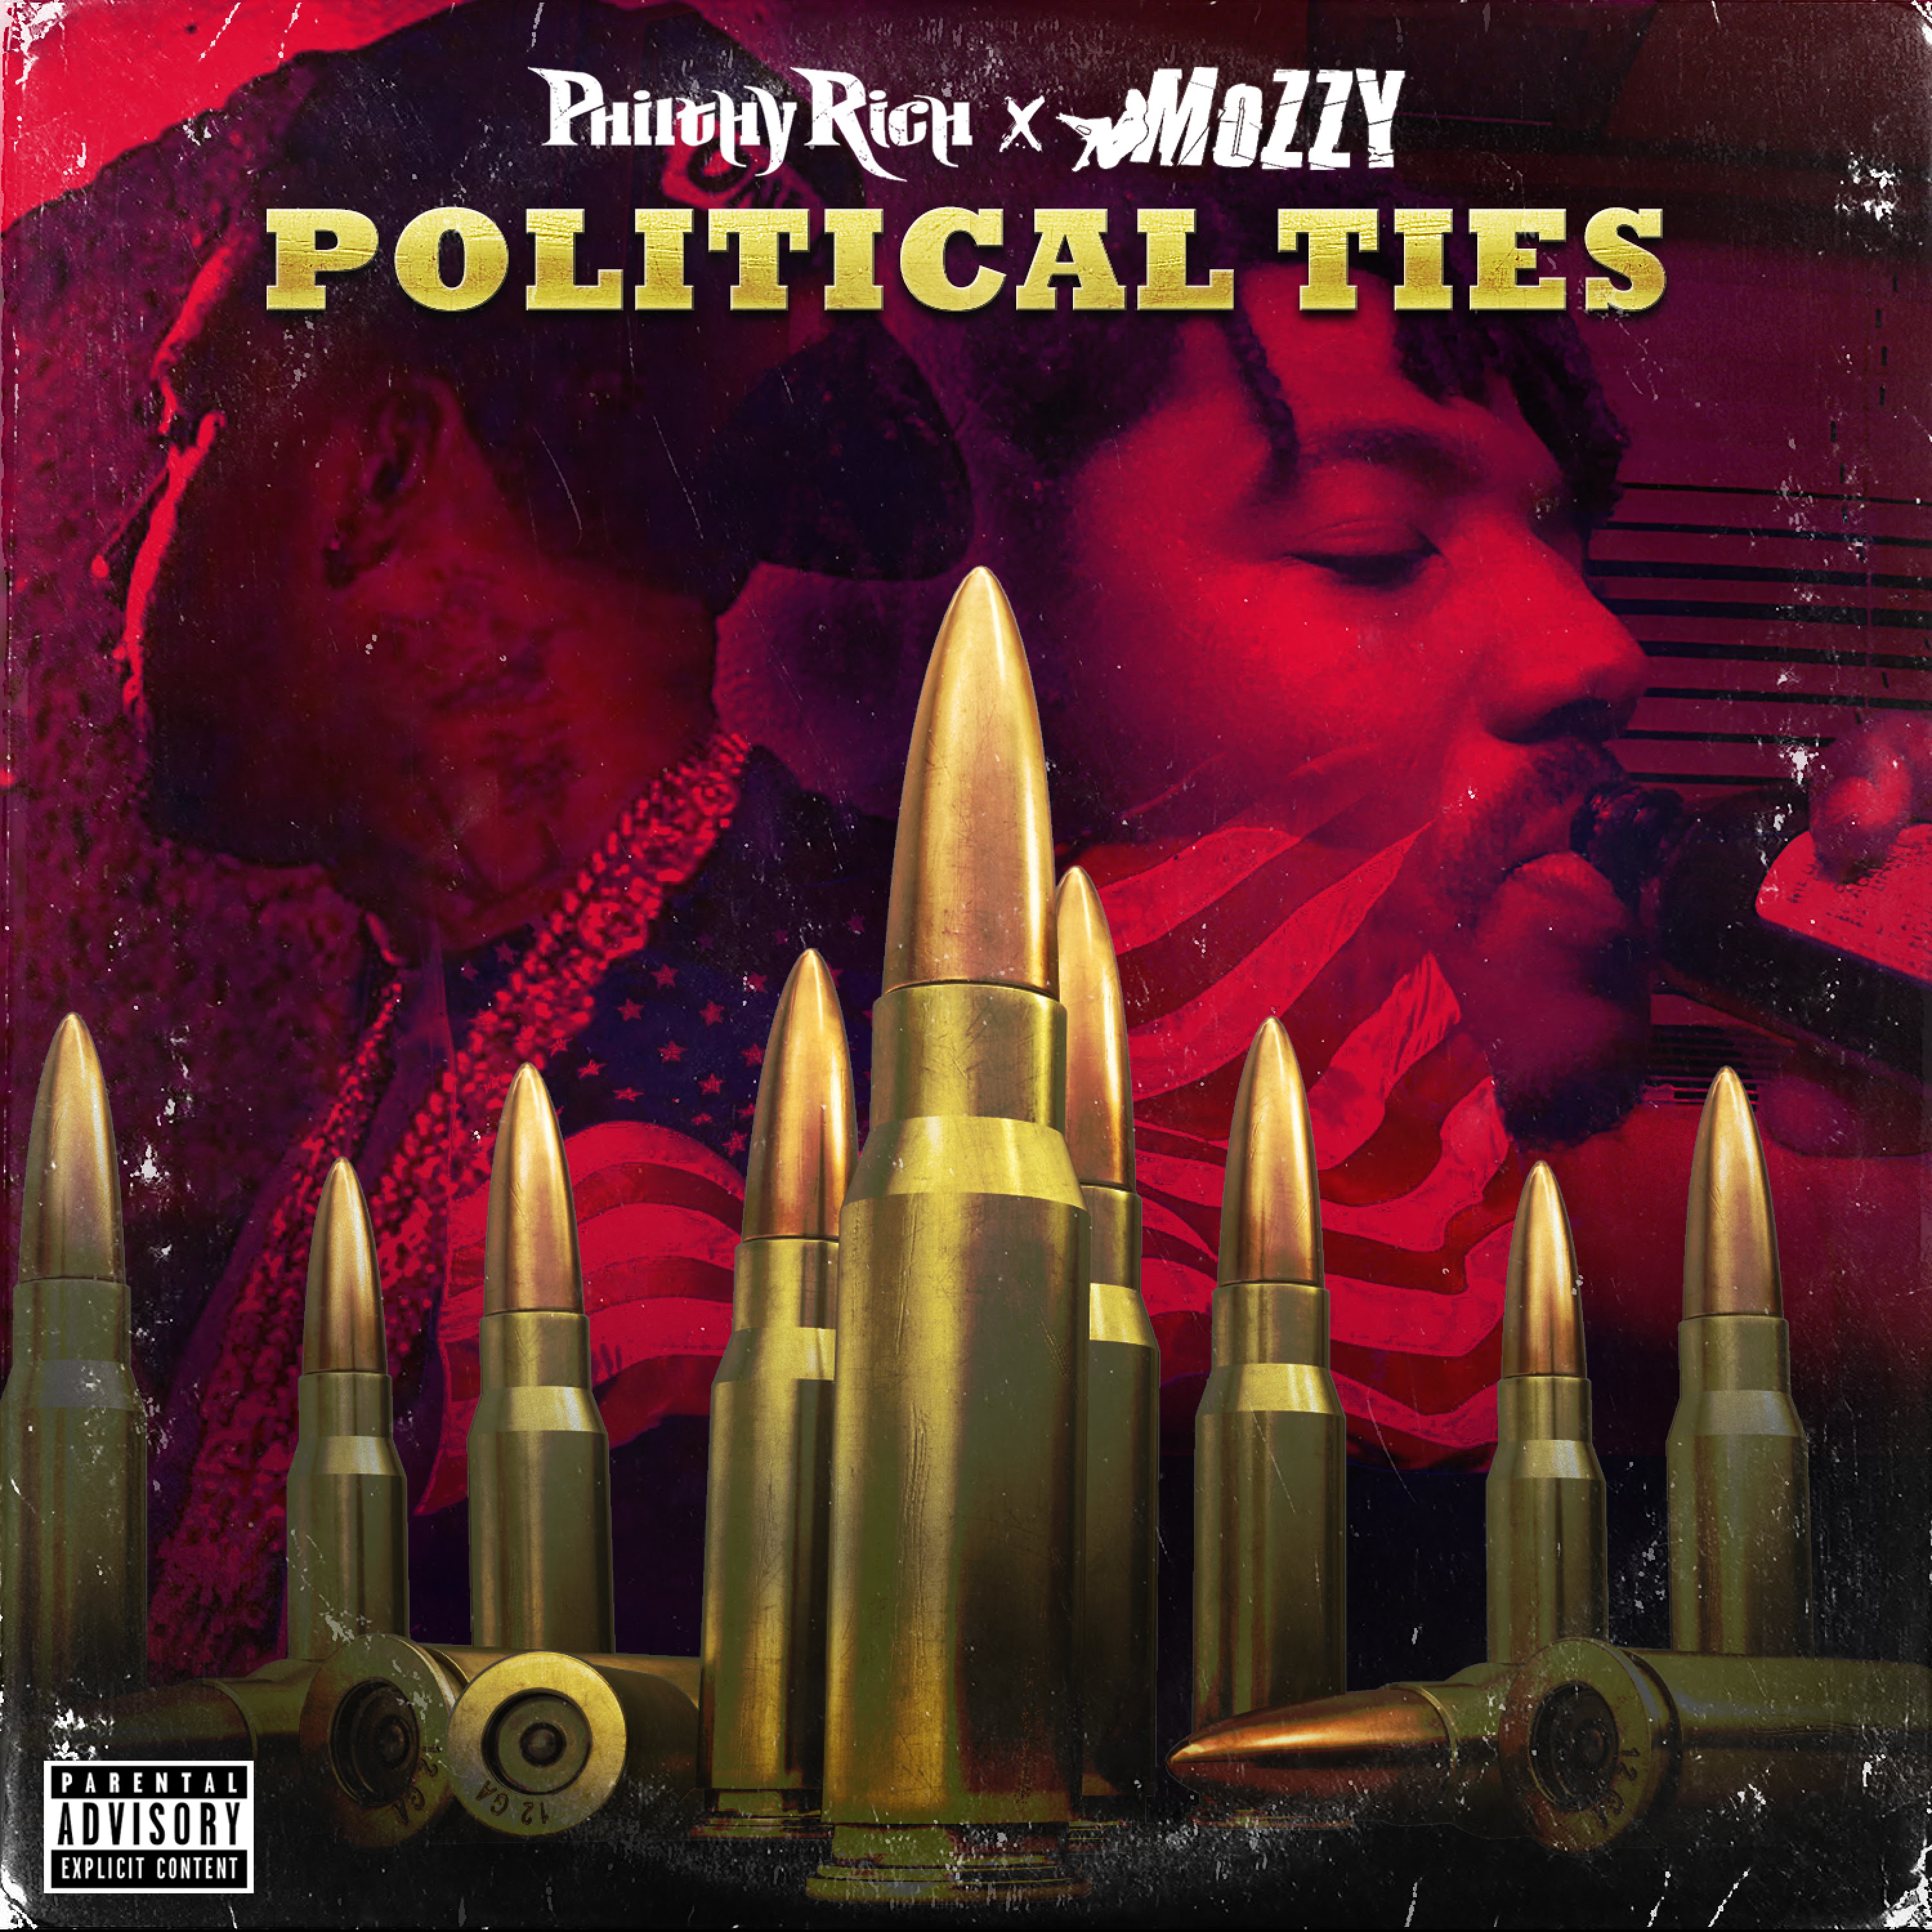 Philthy-Rich-Mozzy-Political Ties